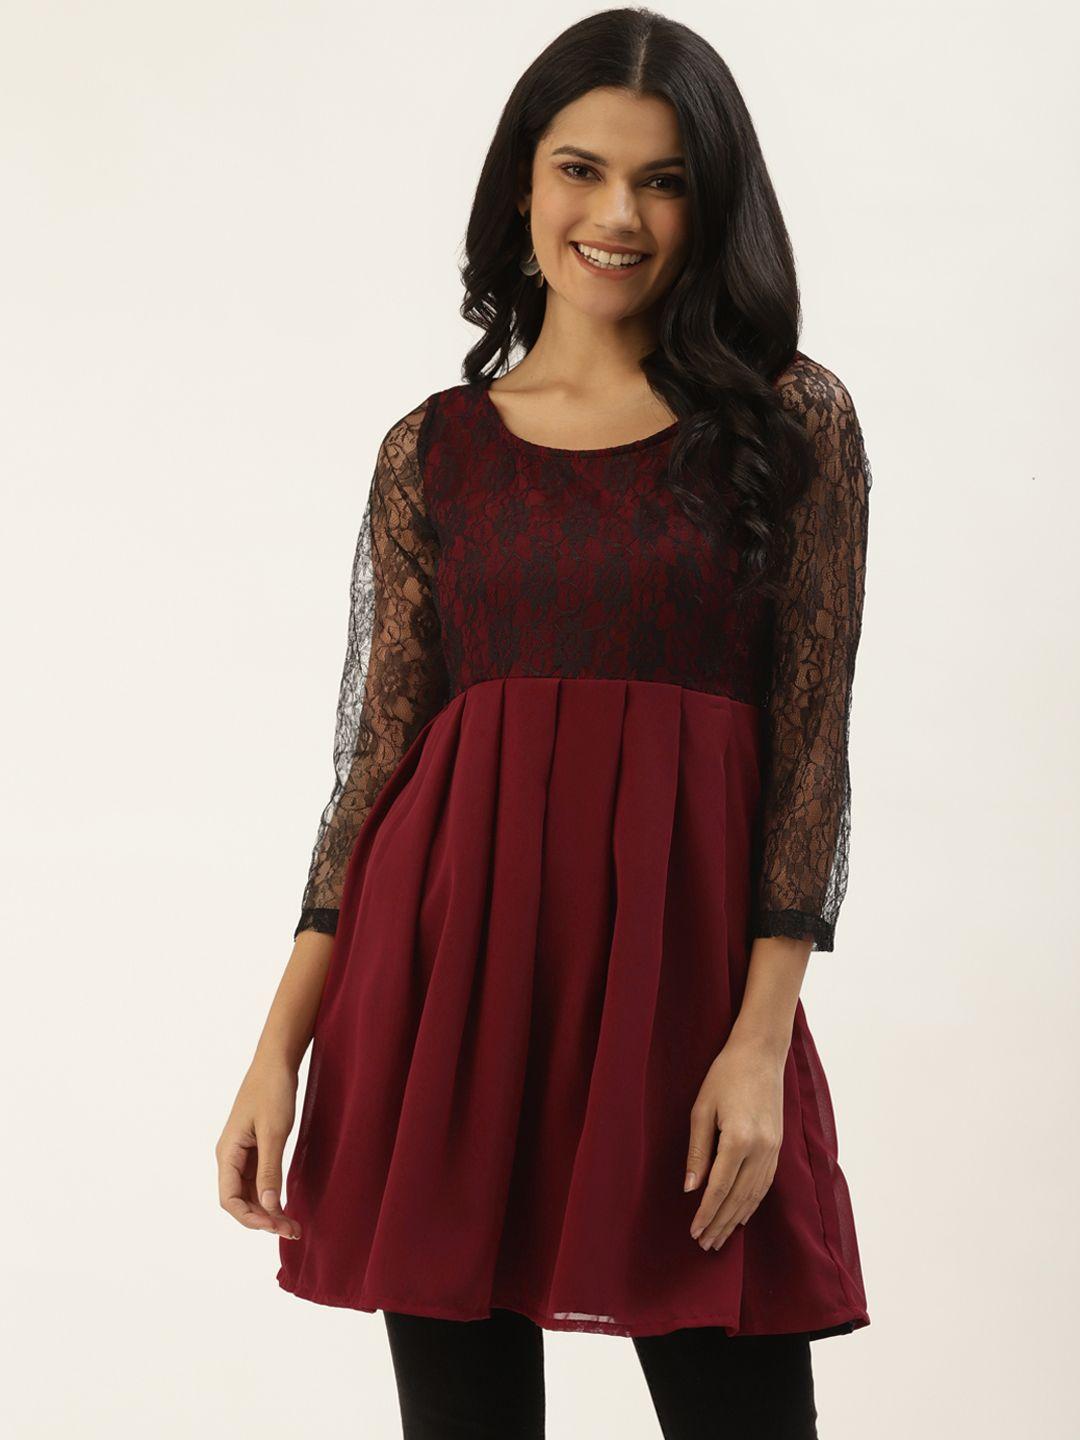 belle-fille-black-&-maroon-a-line-top-with-lace-inserts-&-pleated-detail